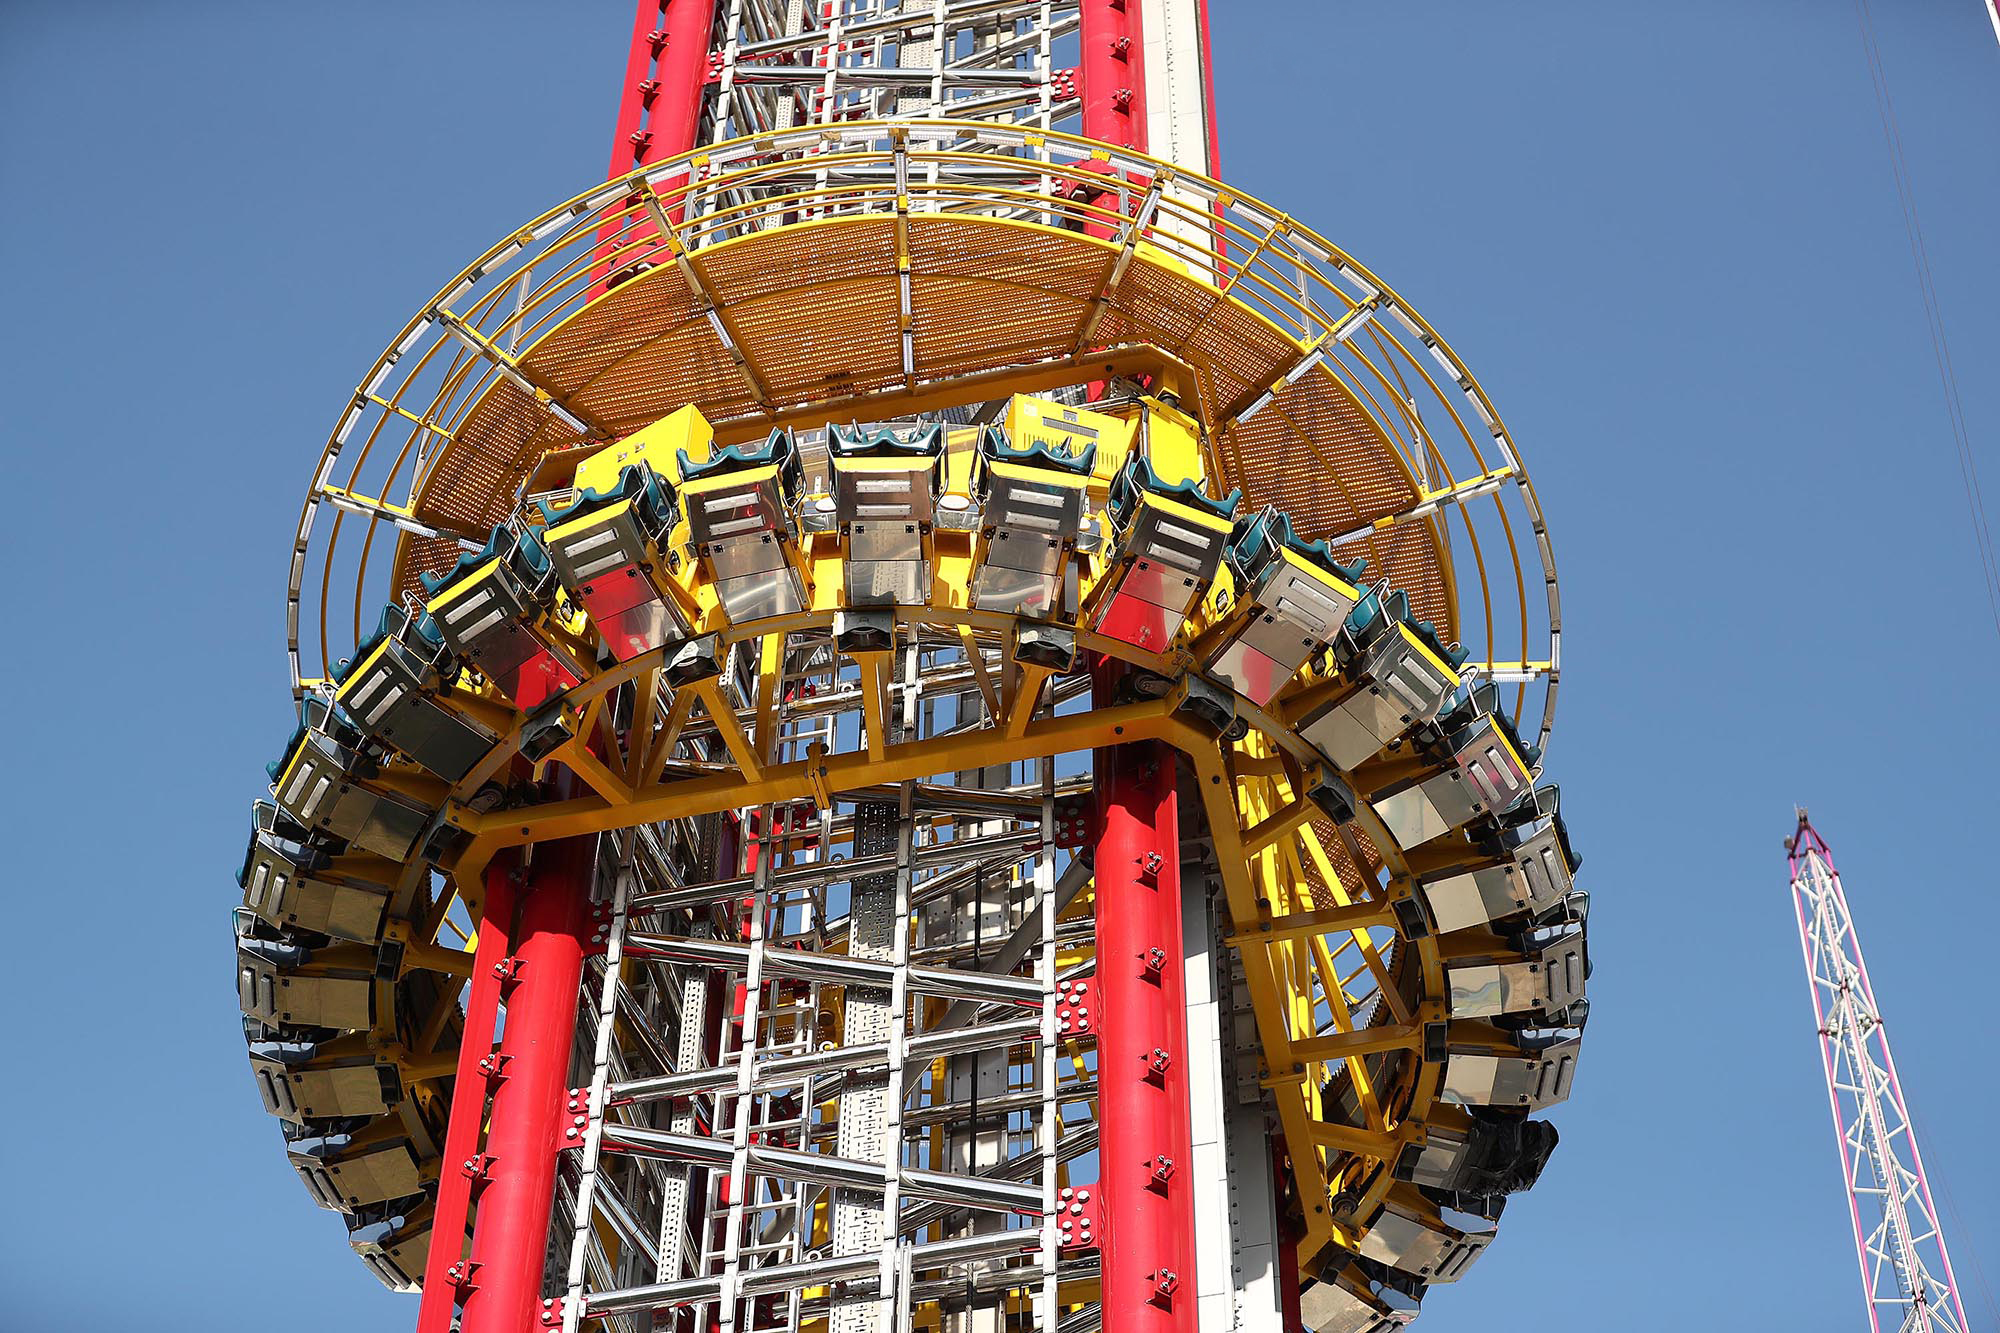 PHOTO:The Orlando Free Fall drop tower in ICON Park in Orlando, March 28, 2022. Tyre Sampson, 14, was killed when he fell from the ride on March 24. 